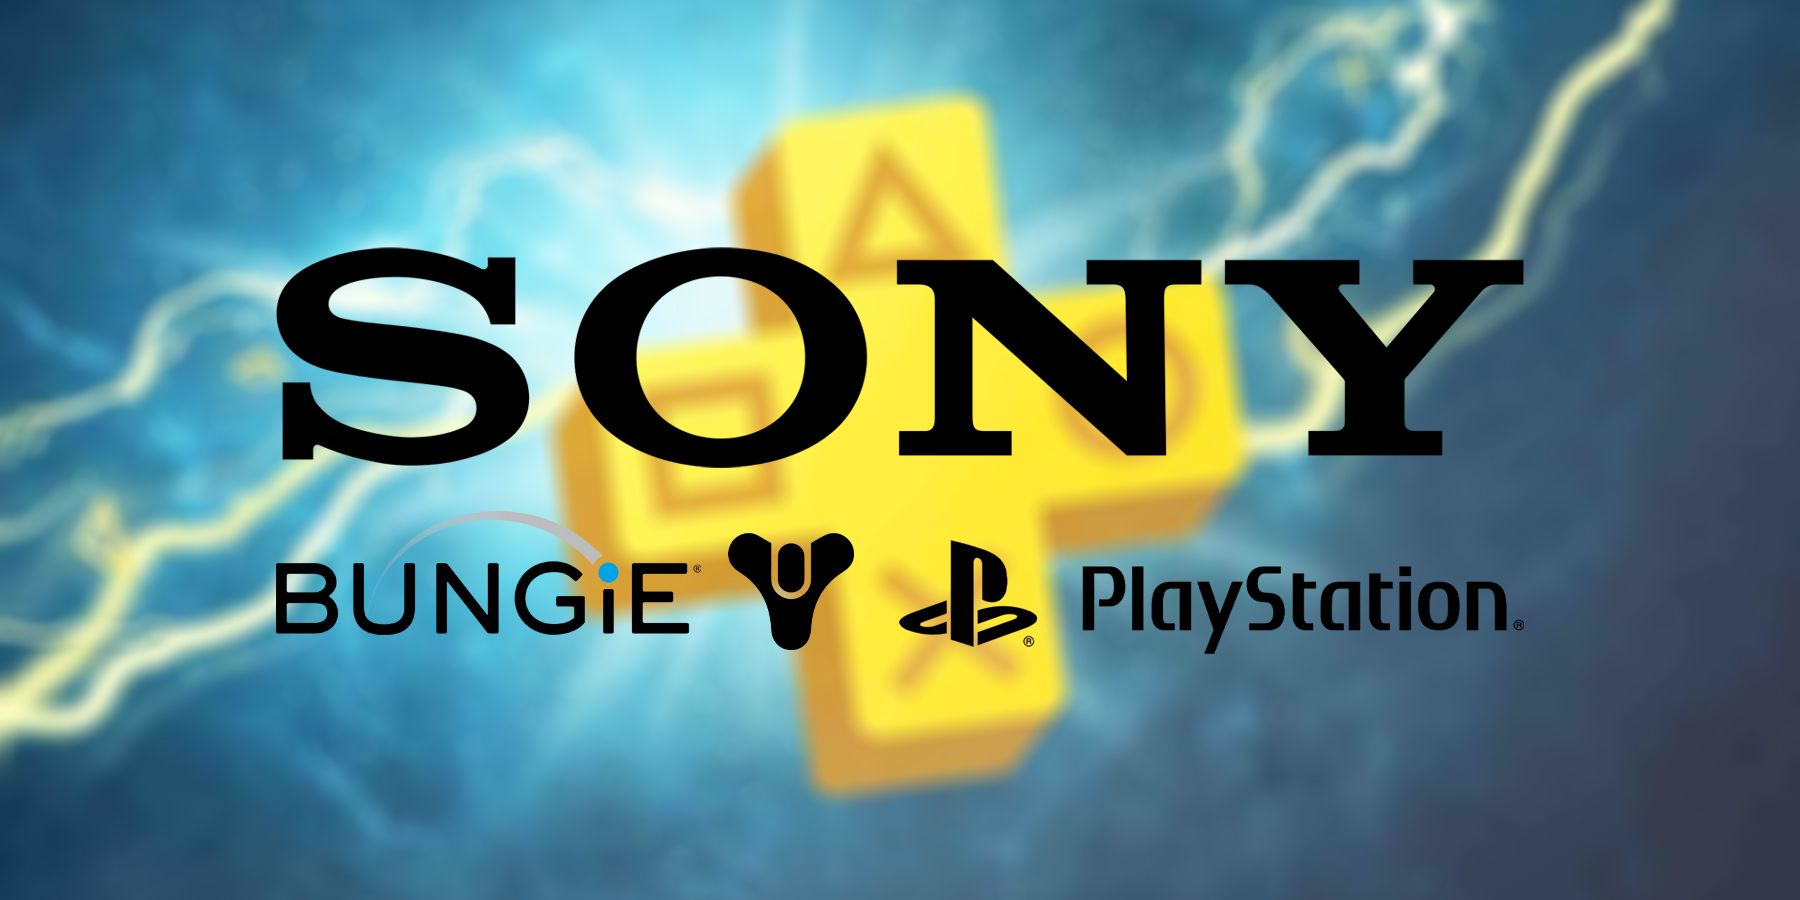 The text logos for Sony, Bungie, and PlayStation with the Destiny crest next to Bungie's logo.